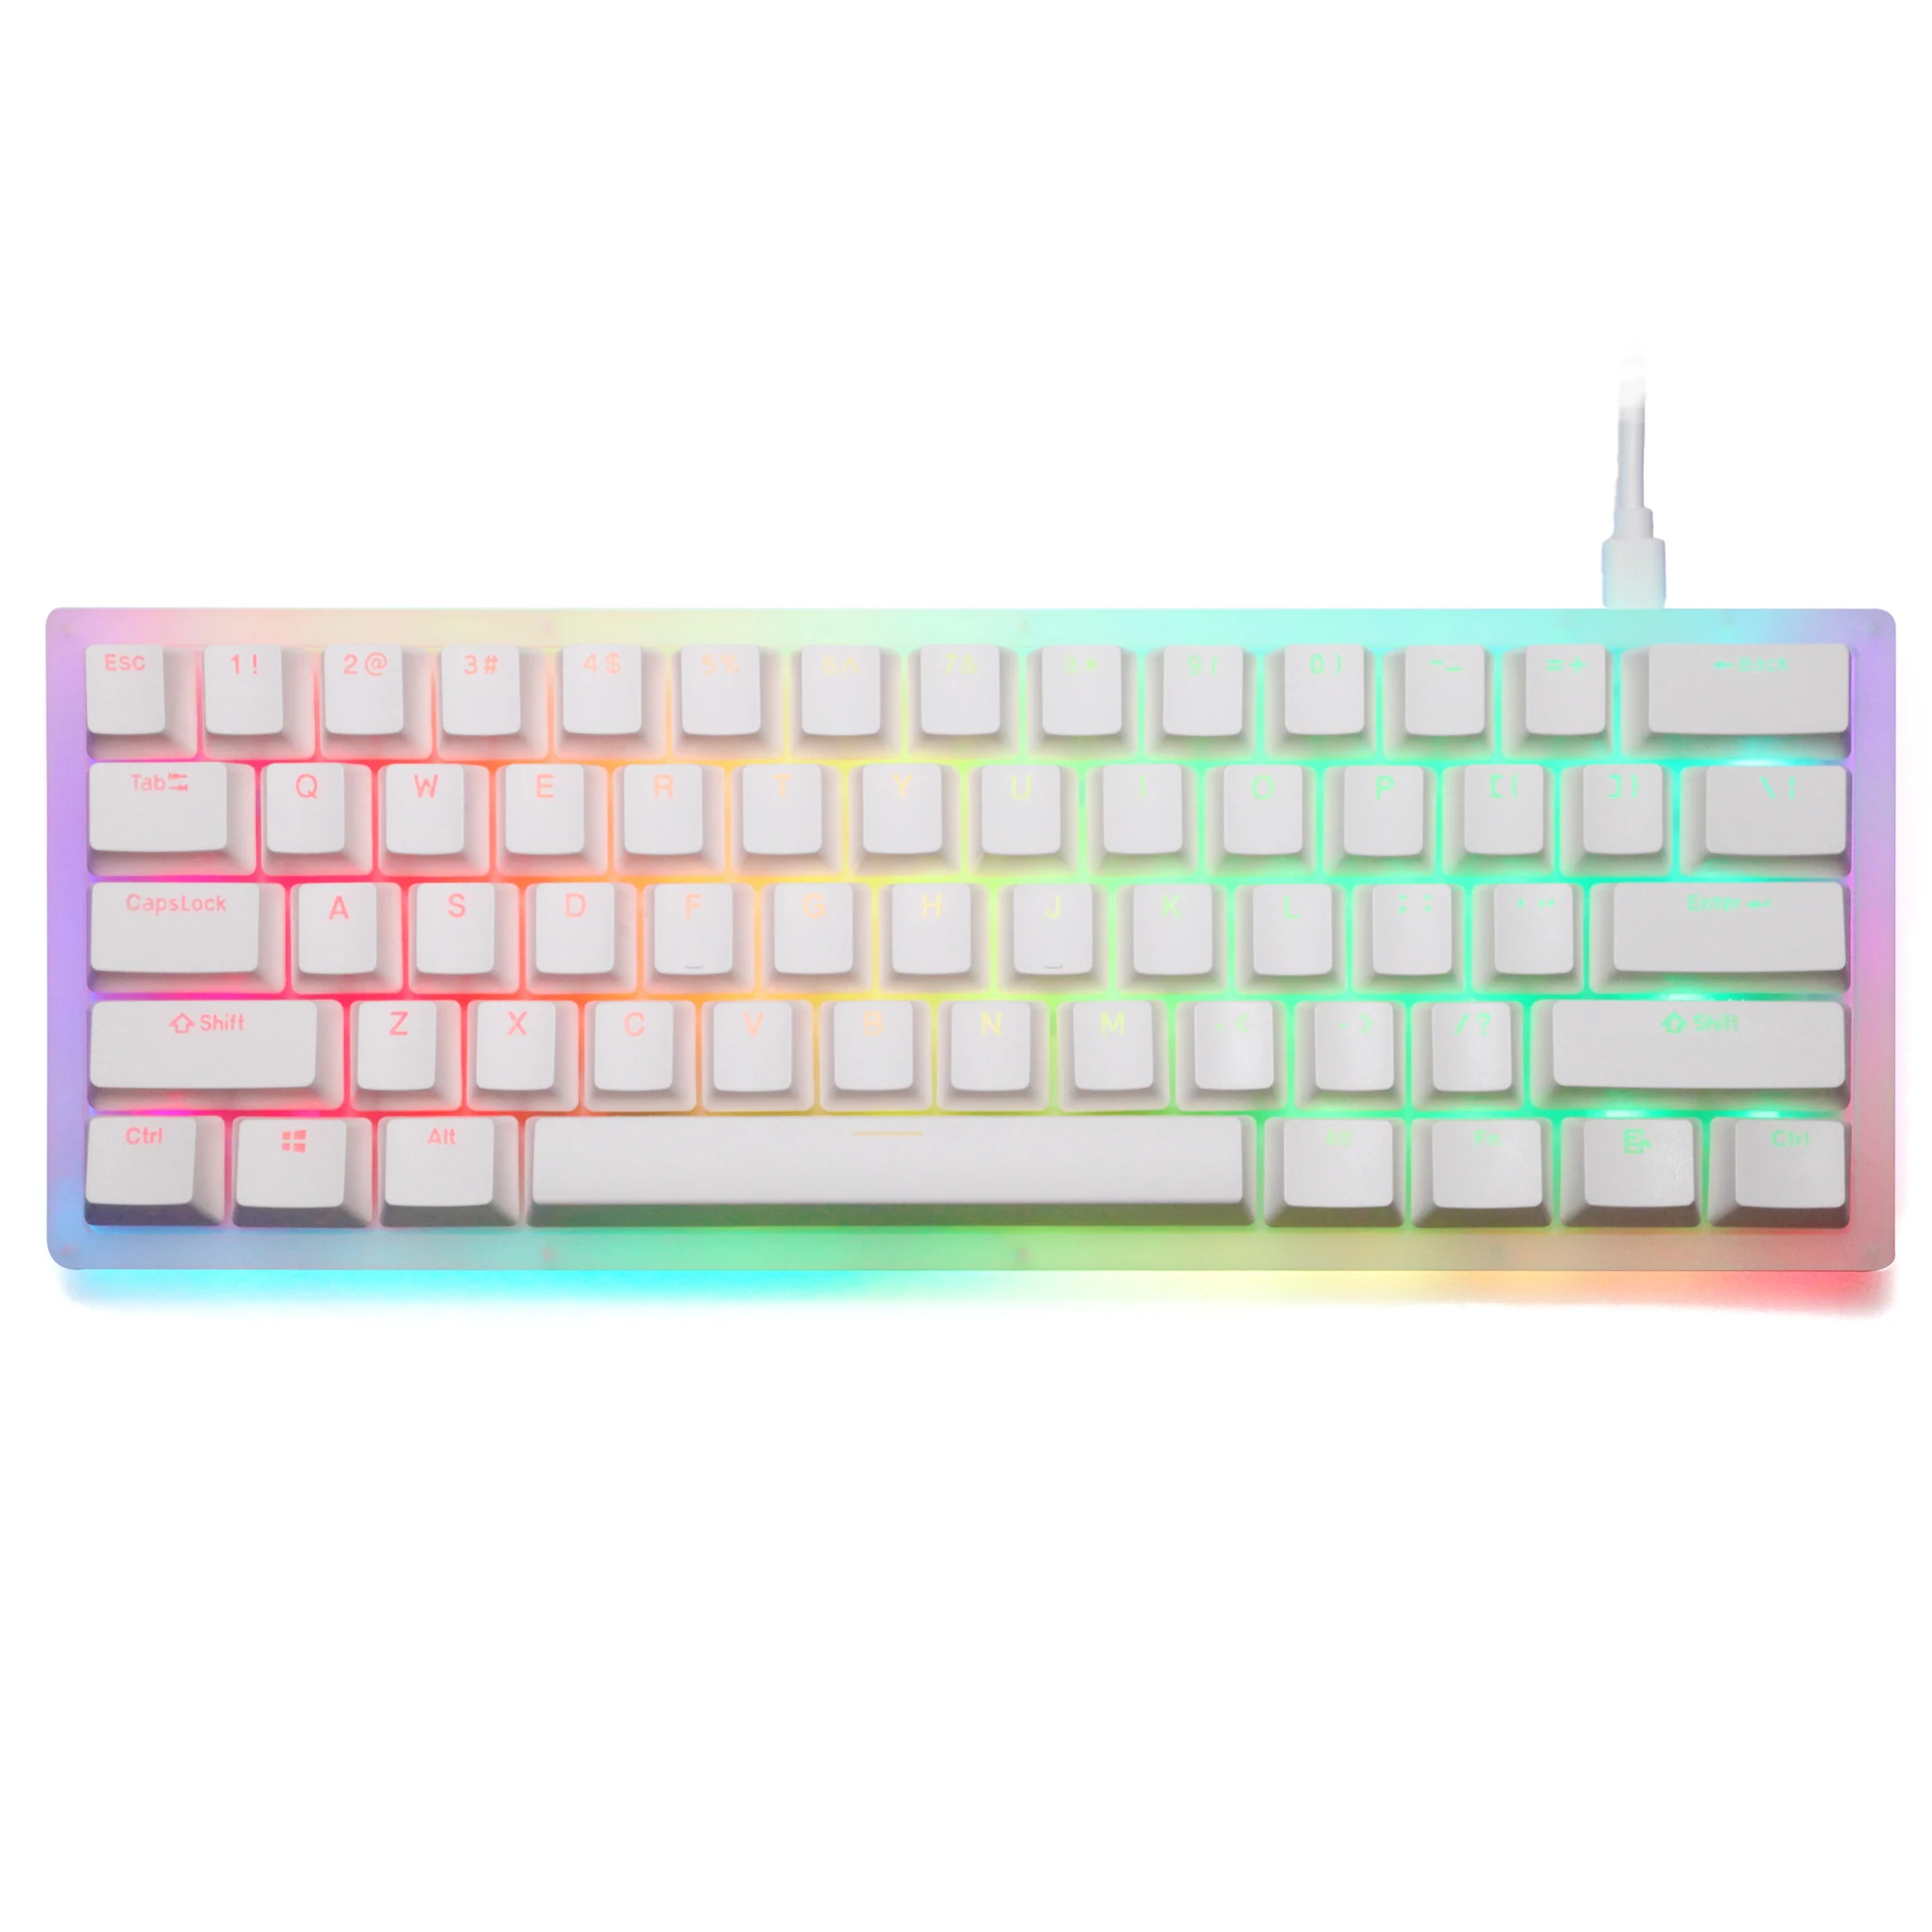 Womier 61 key K61 Mechanical Keyboard 60% 60 PCB CASE hot swappable switch support lighting effects with RGB switch led